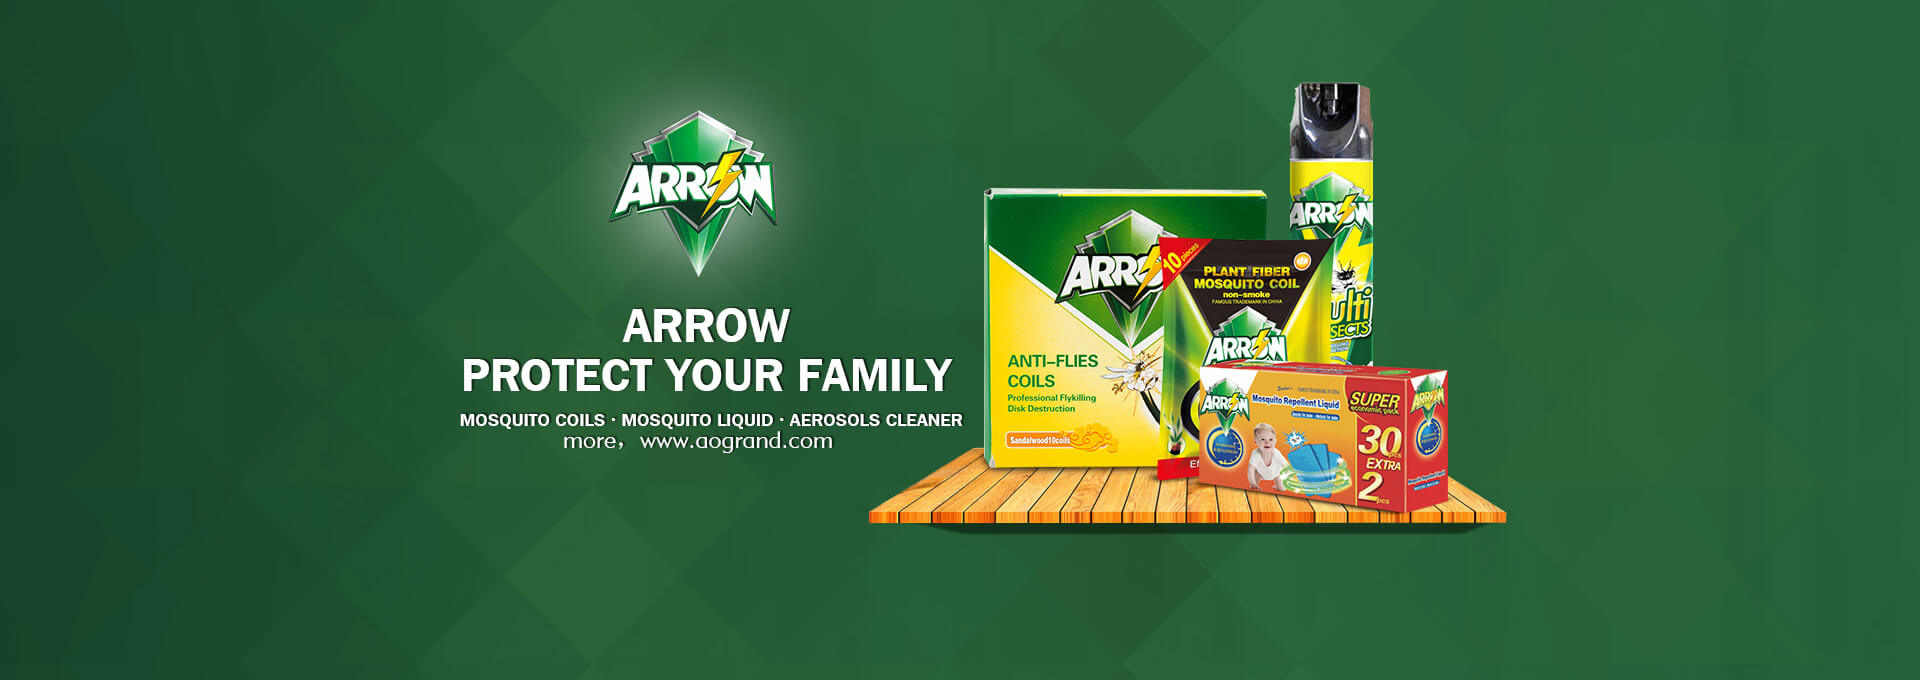 Methods To Repel mosquitoes-Arrow-protect your family